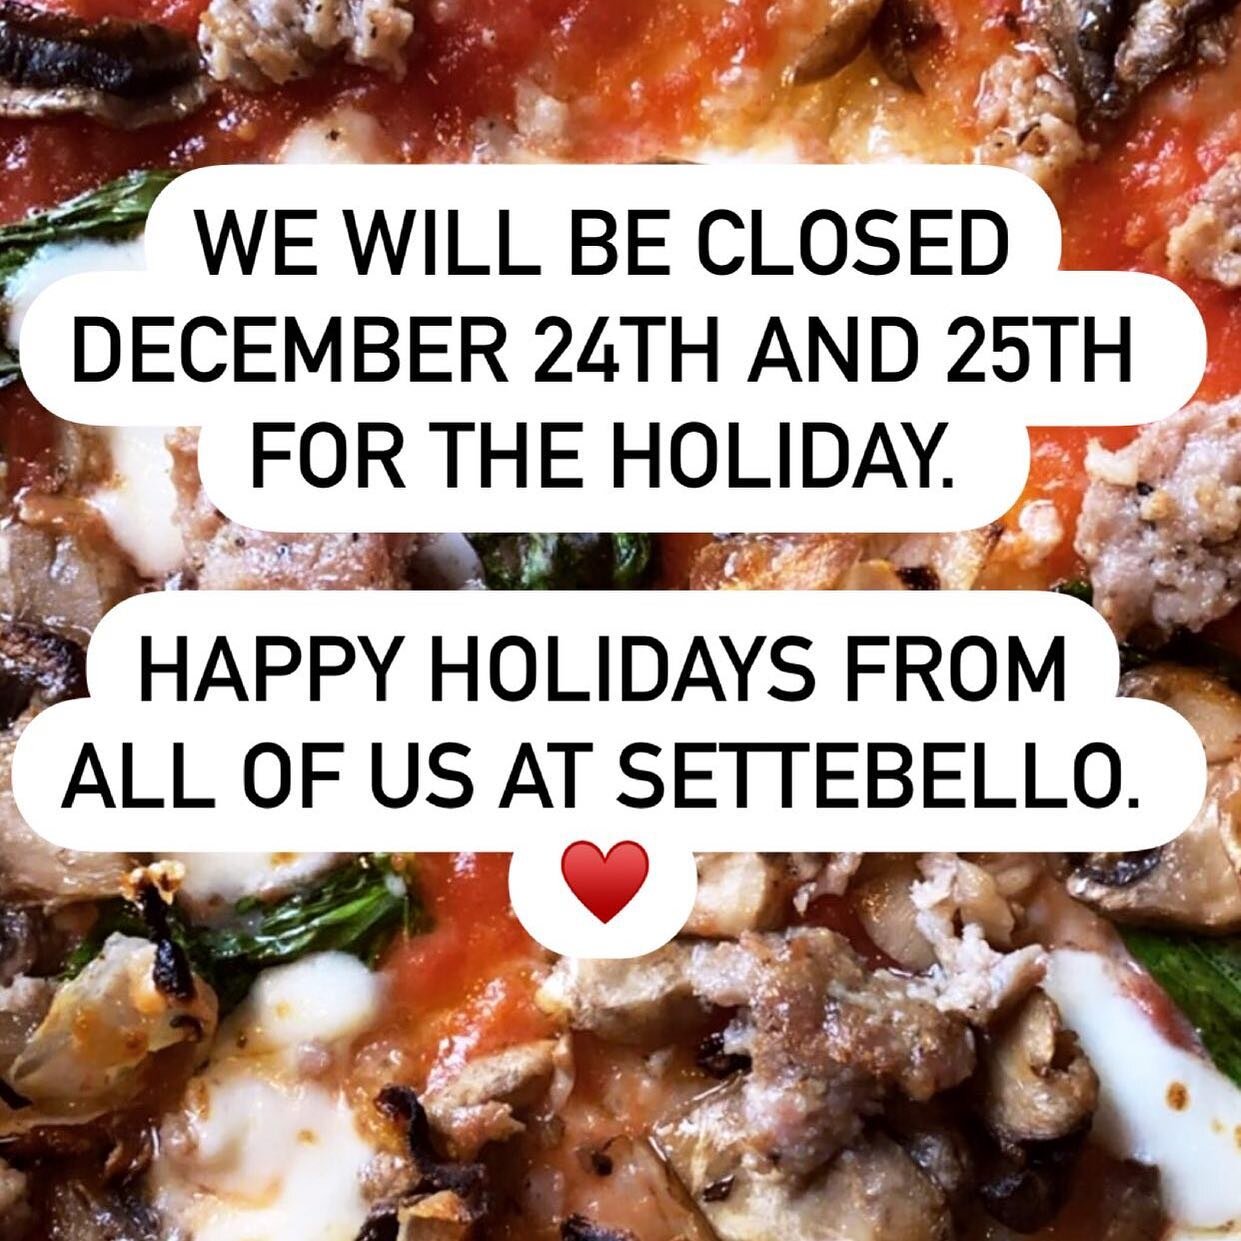 We wish everyone a joy filled holiday. We will see you on the 26th. &hearts;️